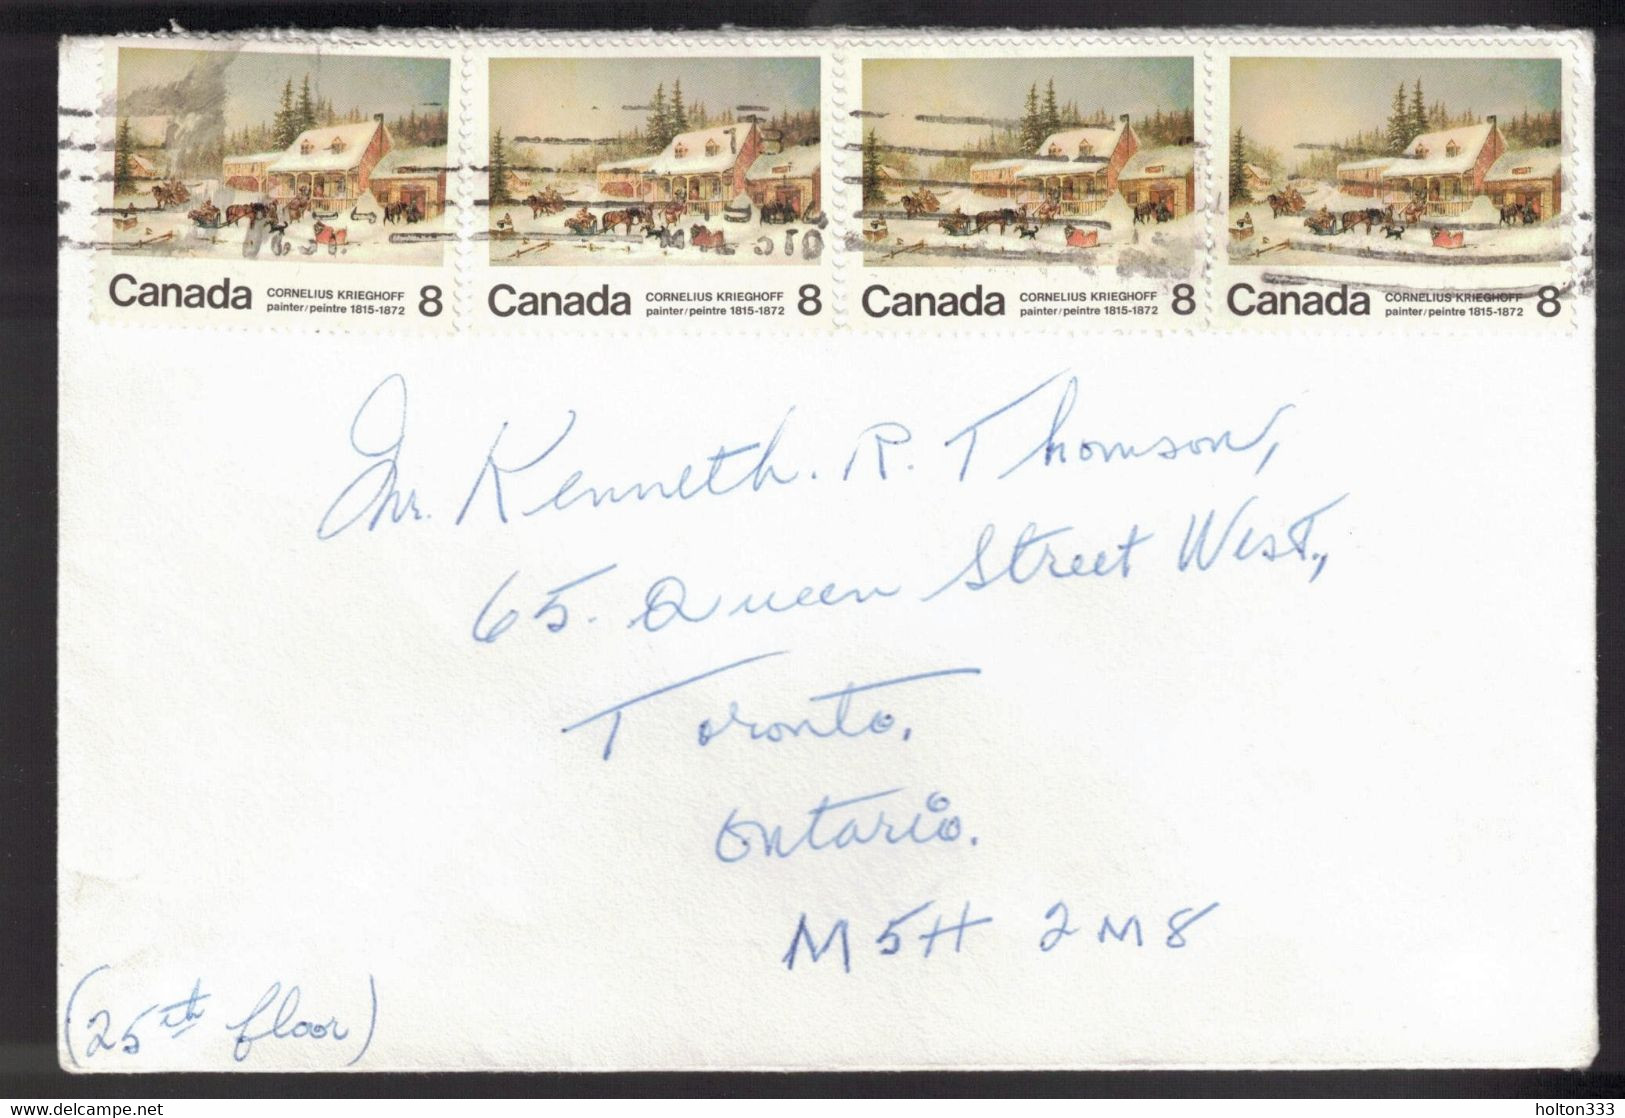 CANADA Scott # 610 And 610i On Cover - Last 2 Have Broken Door Frame - Commemorative Covers